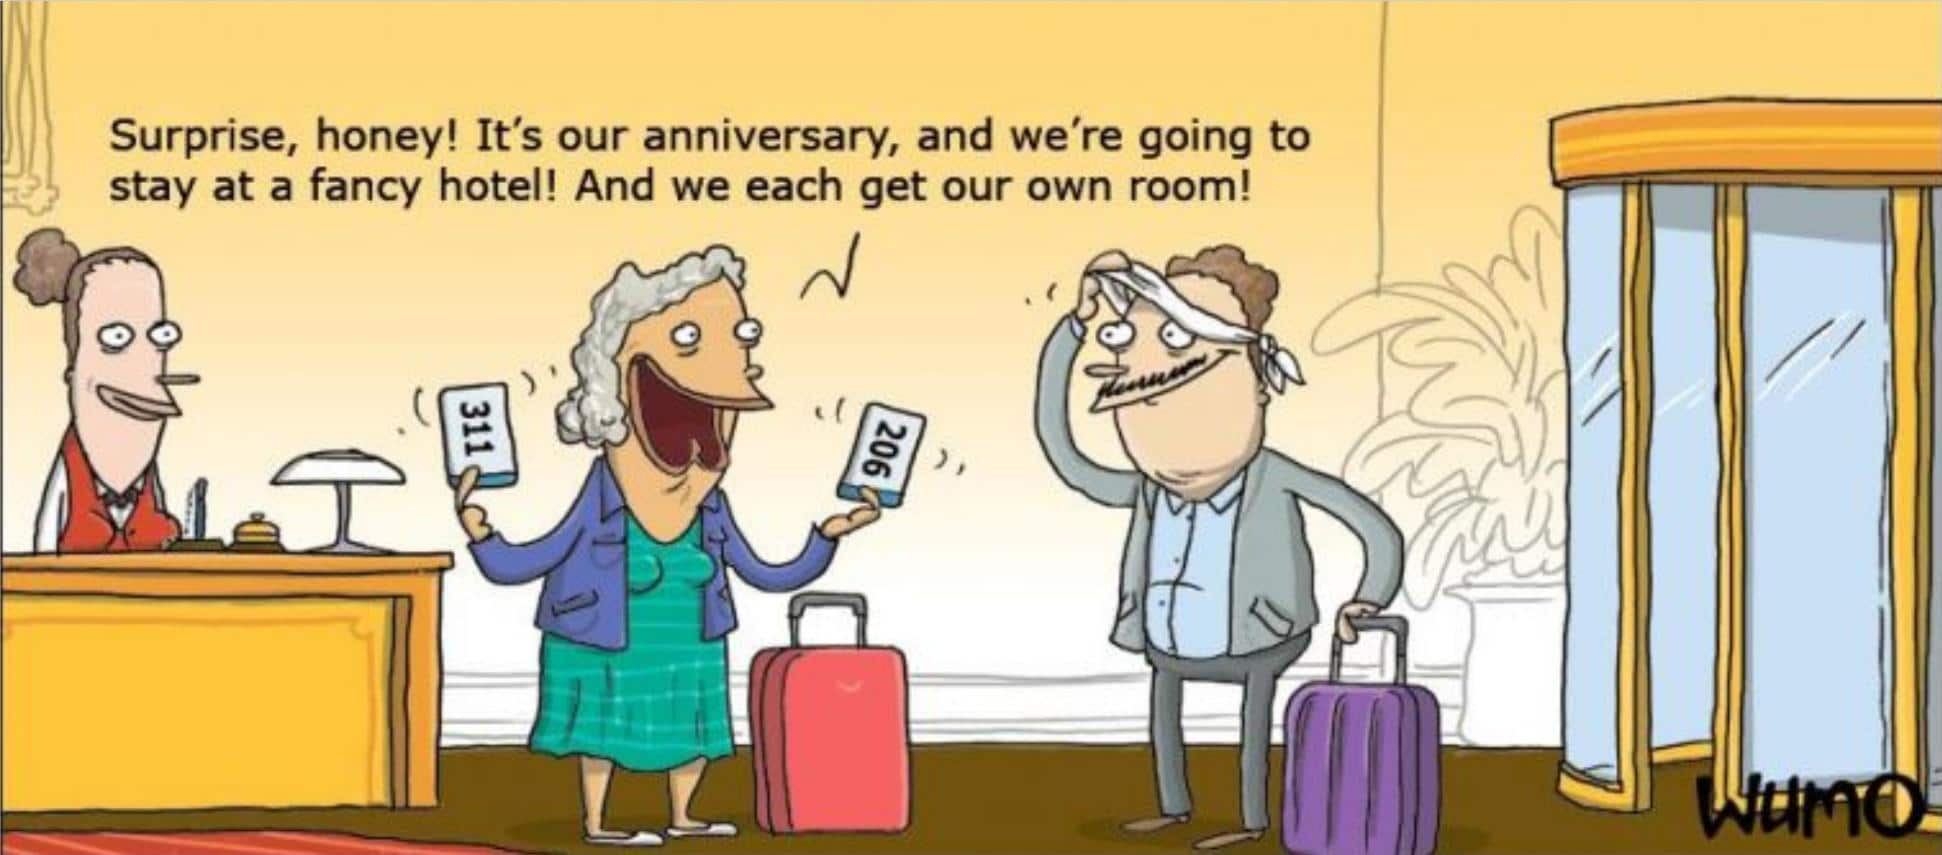 Cringe,  boomer memes Cringe,  text: Surprise, honey! It's our anniversary, and we're going to stay at a fancy hotel! And we each get our own room! 